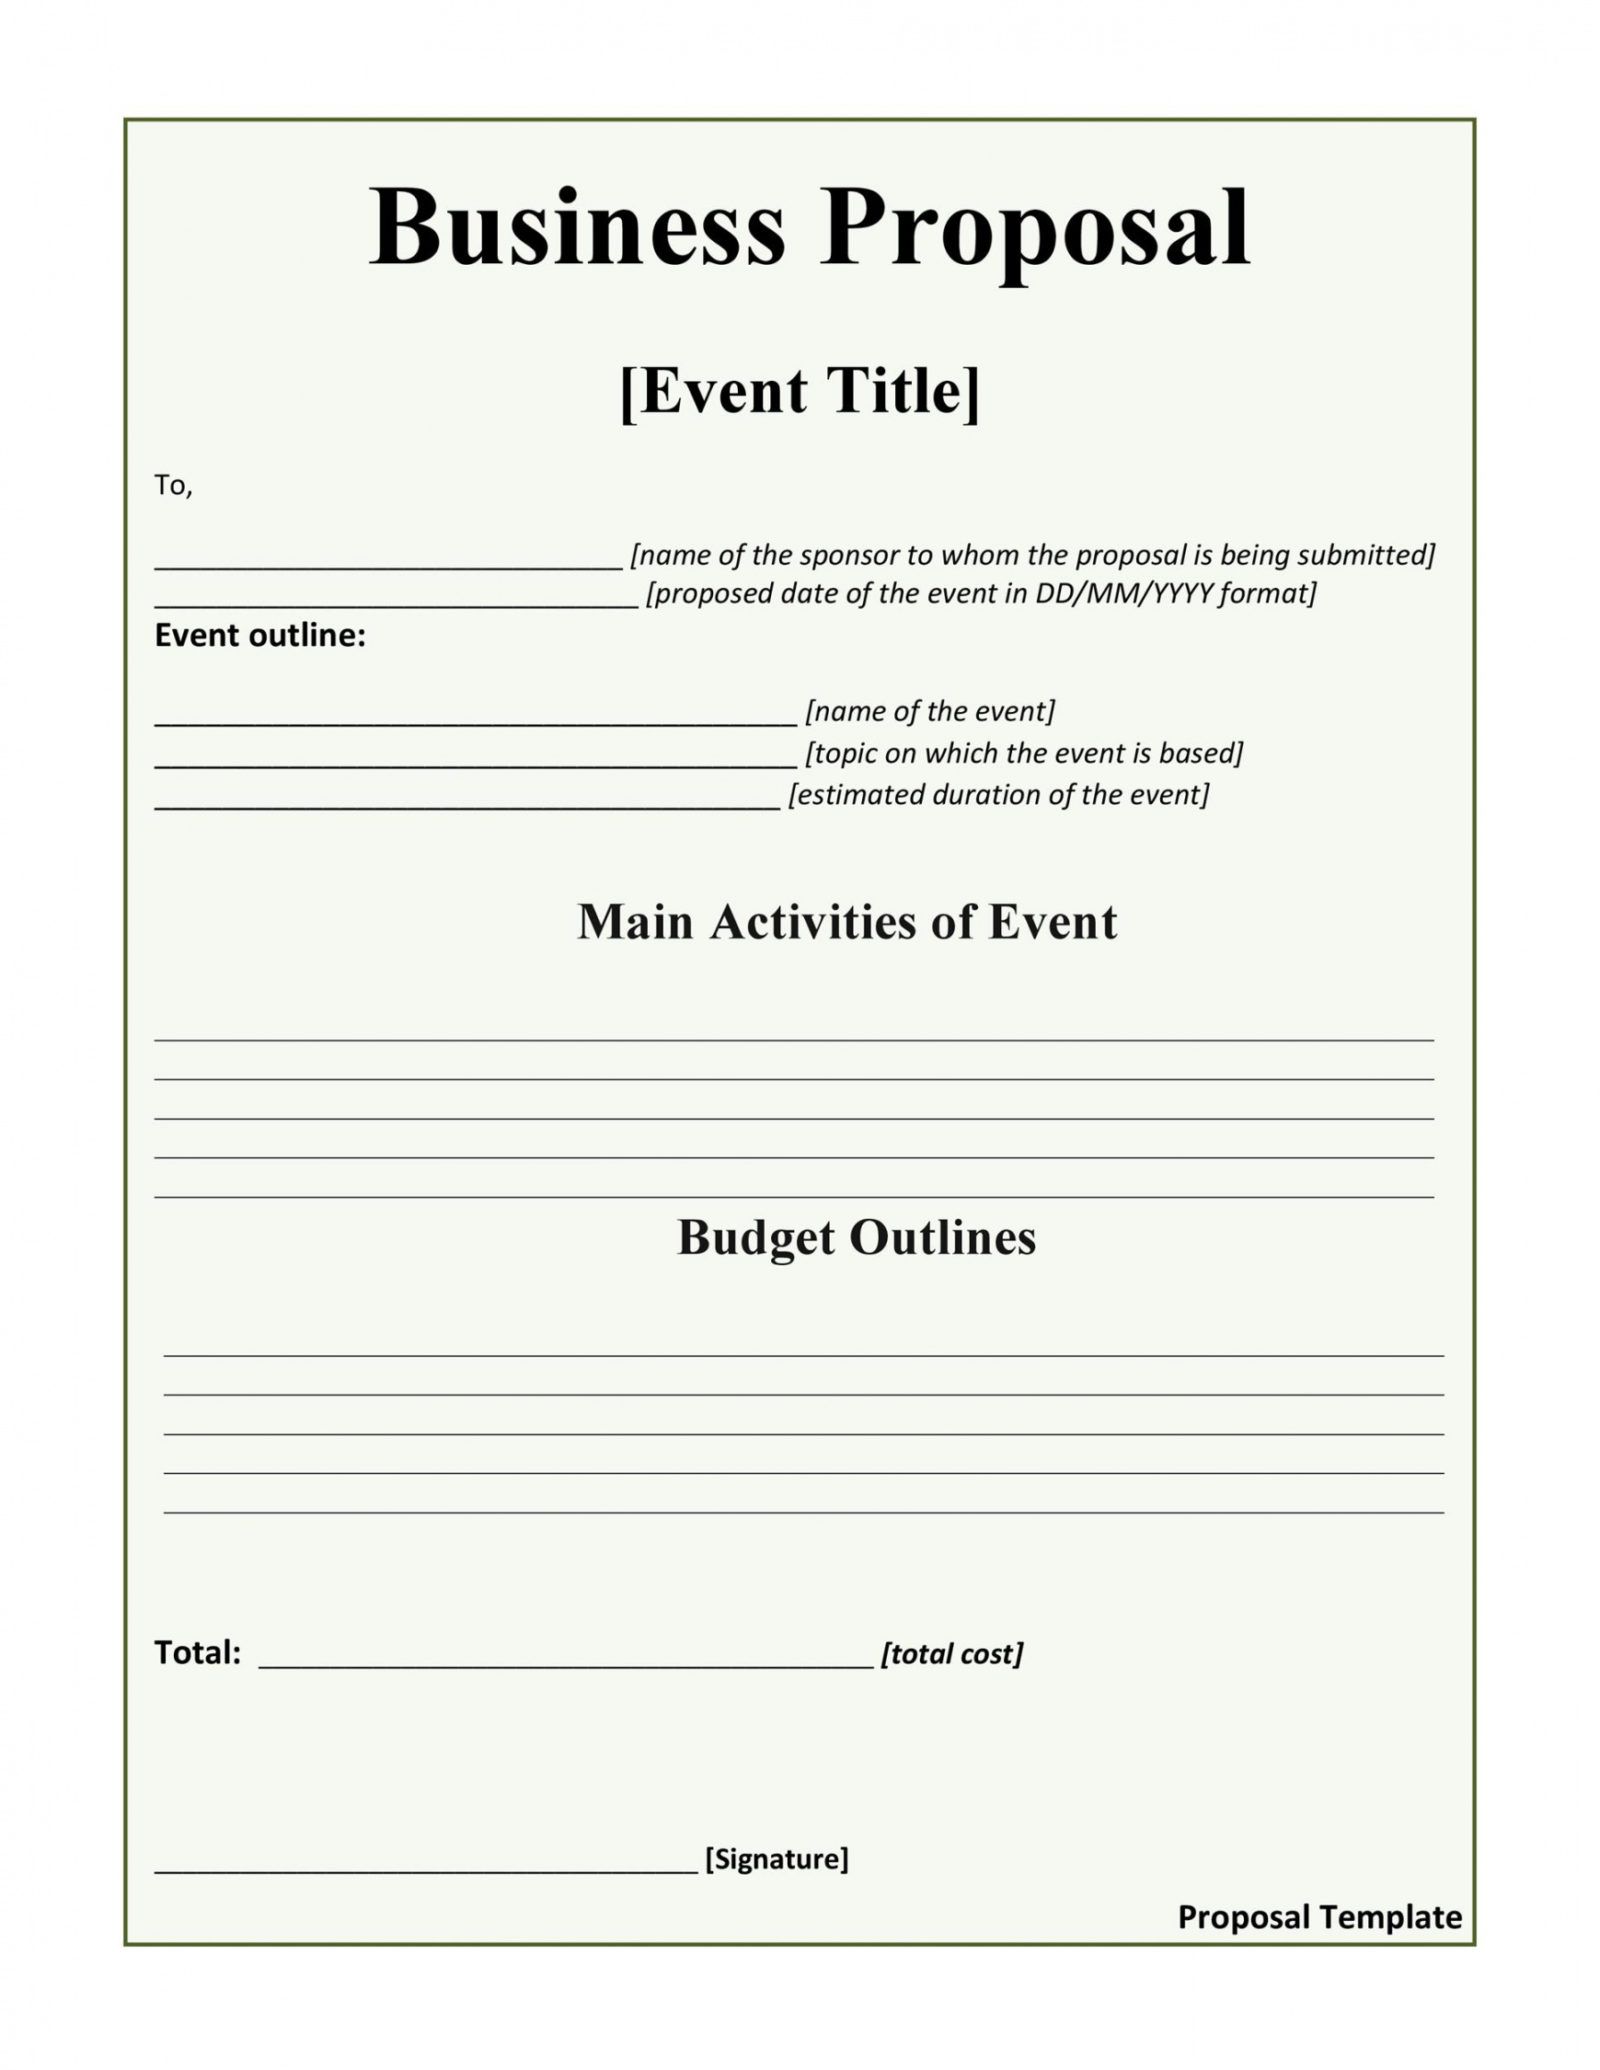 printable-30-business-proposal-templates-proposal-letter-samples